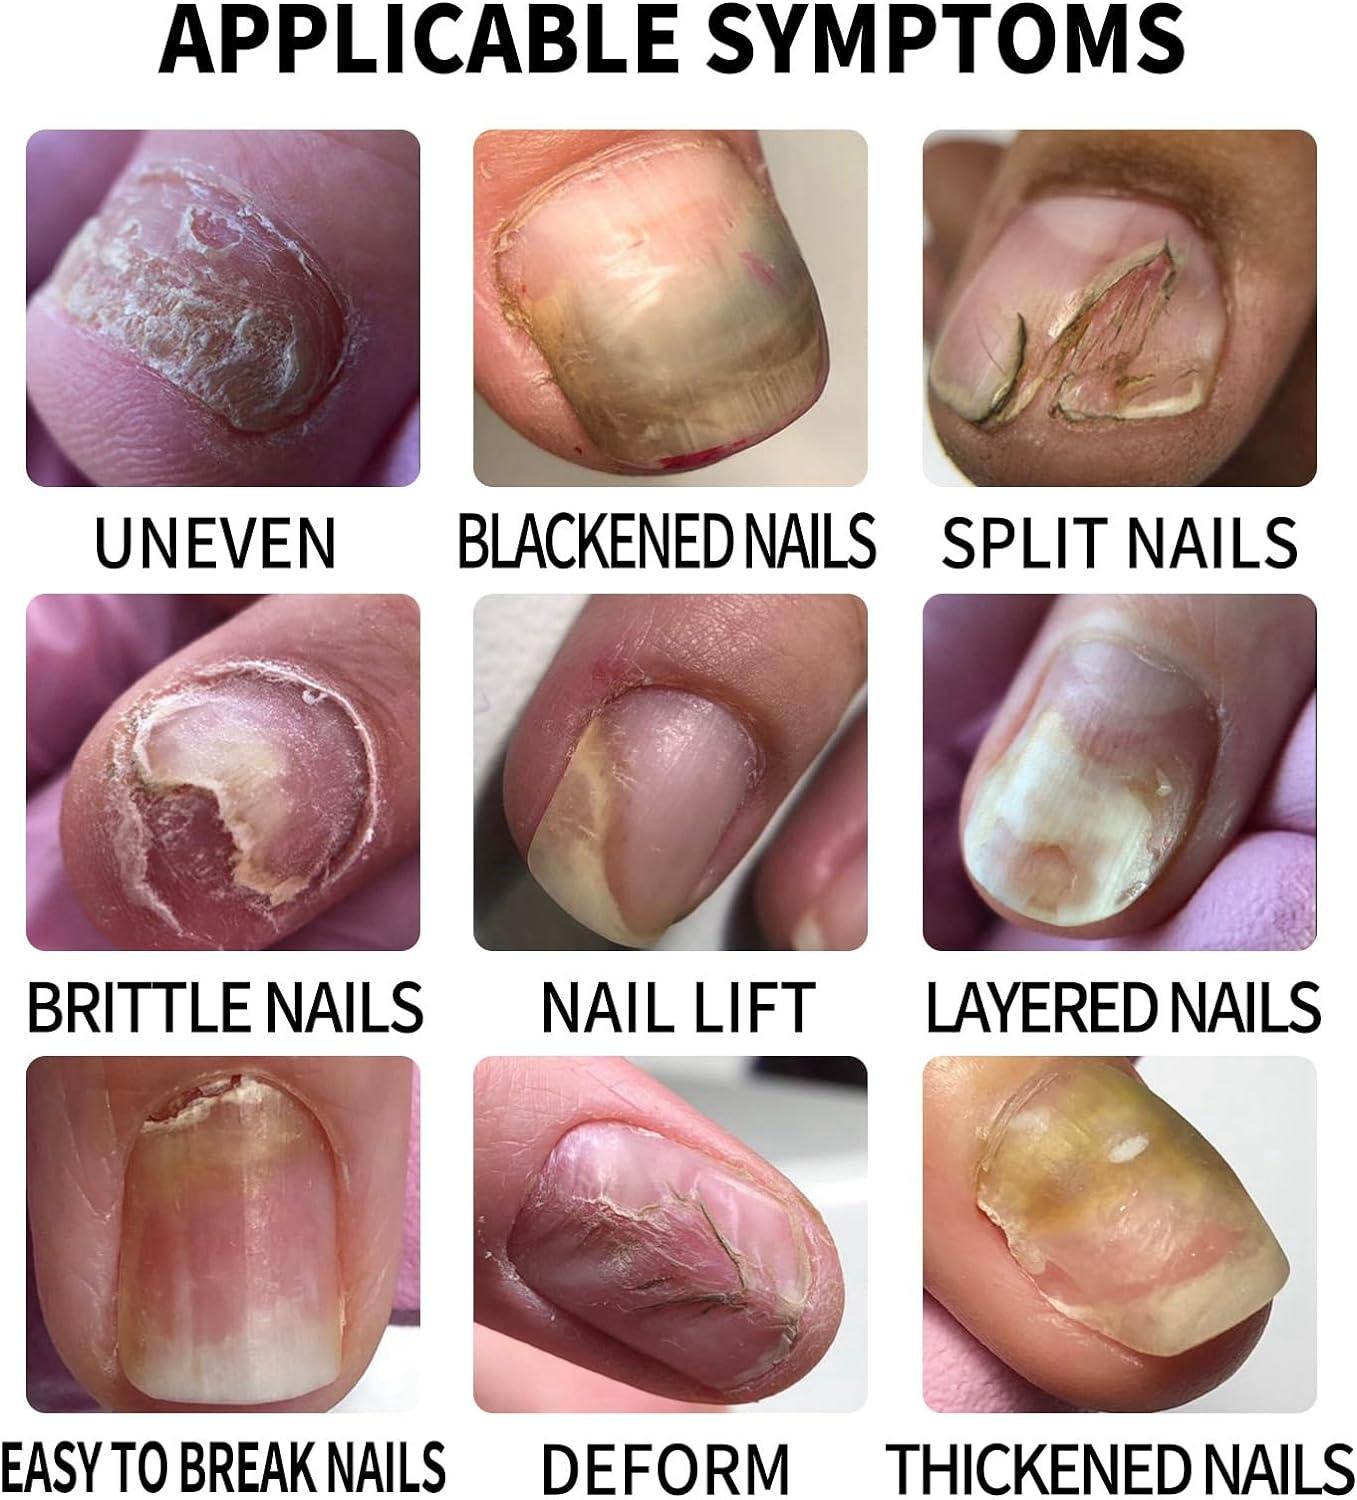 Brittle Nails Treatment - Afecto Homeopathy®